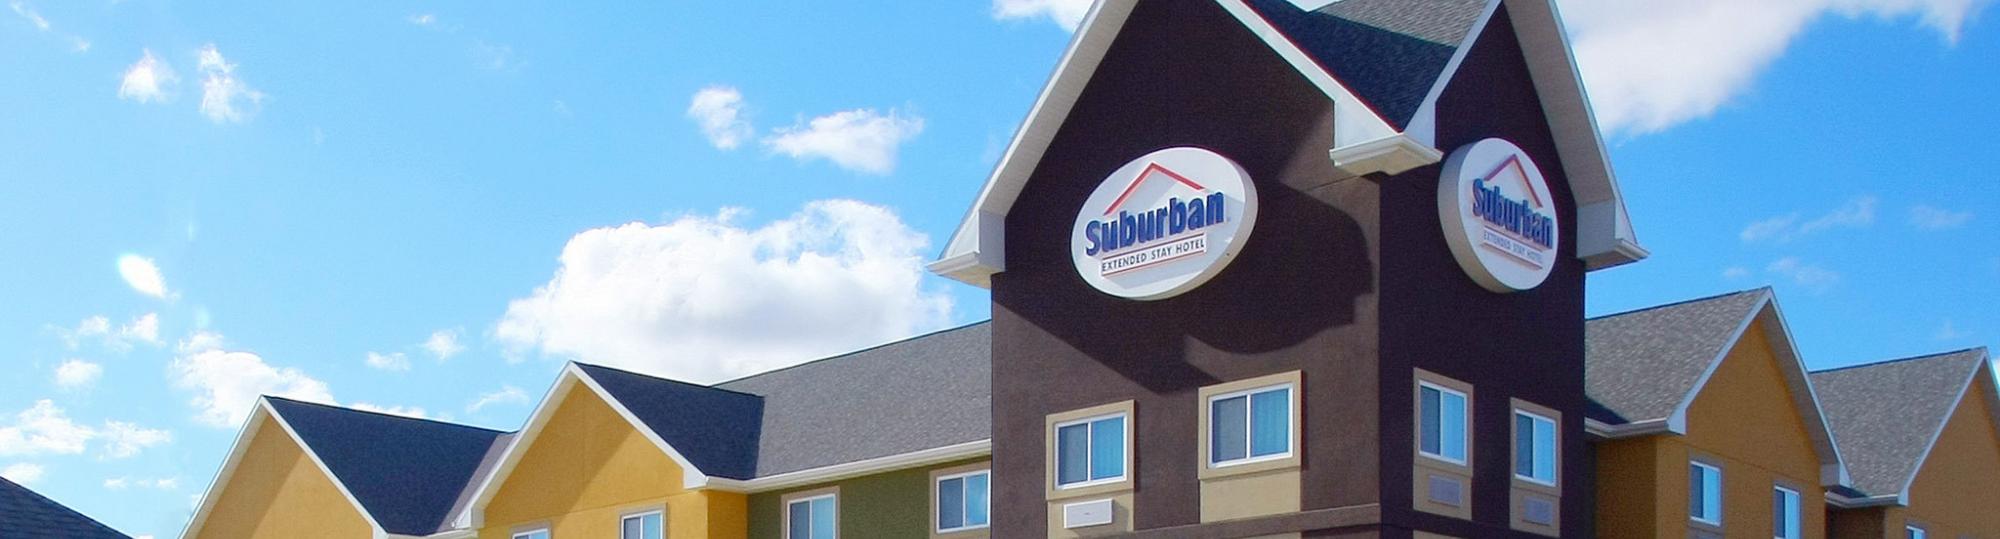 Suburban Extended Stay Hotel Military Discounts with Veterans Advantage